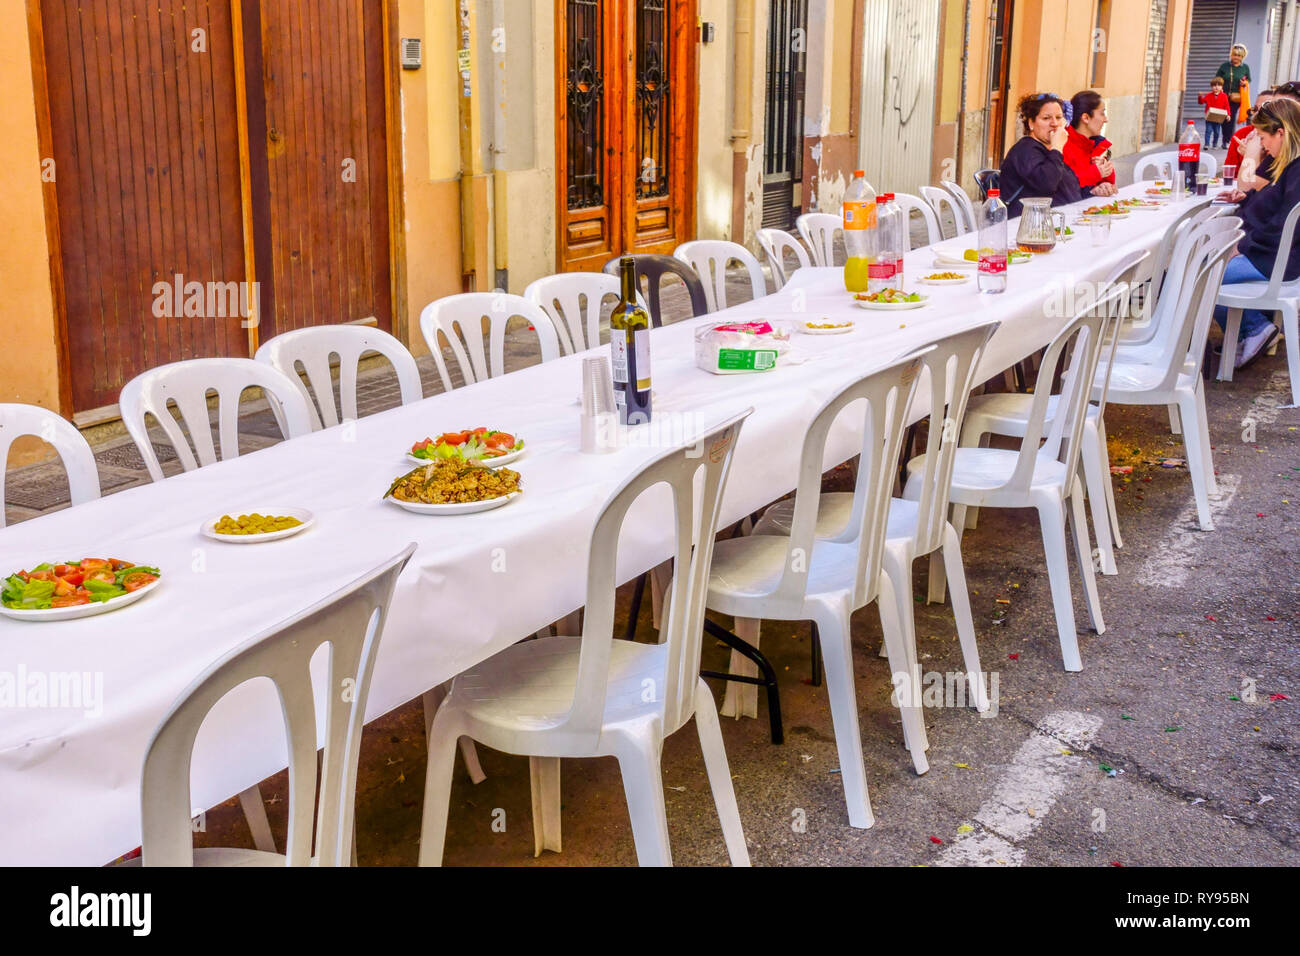 Members of Fallas prepare paella on the street and then have lunch together, Valencia Fallas party Barrio El Botanico Spain lunch dining Stock Photo